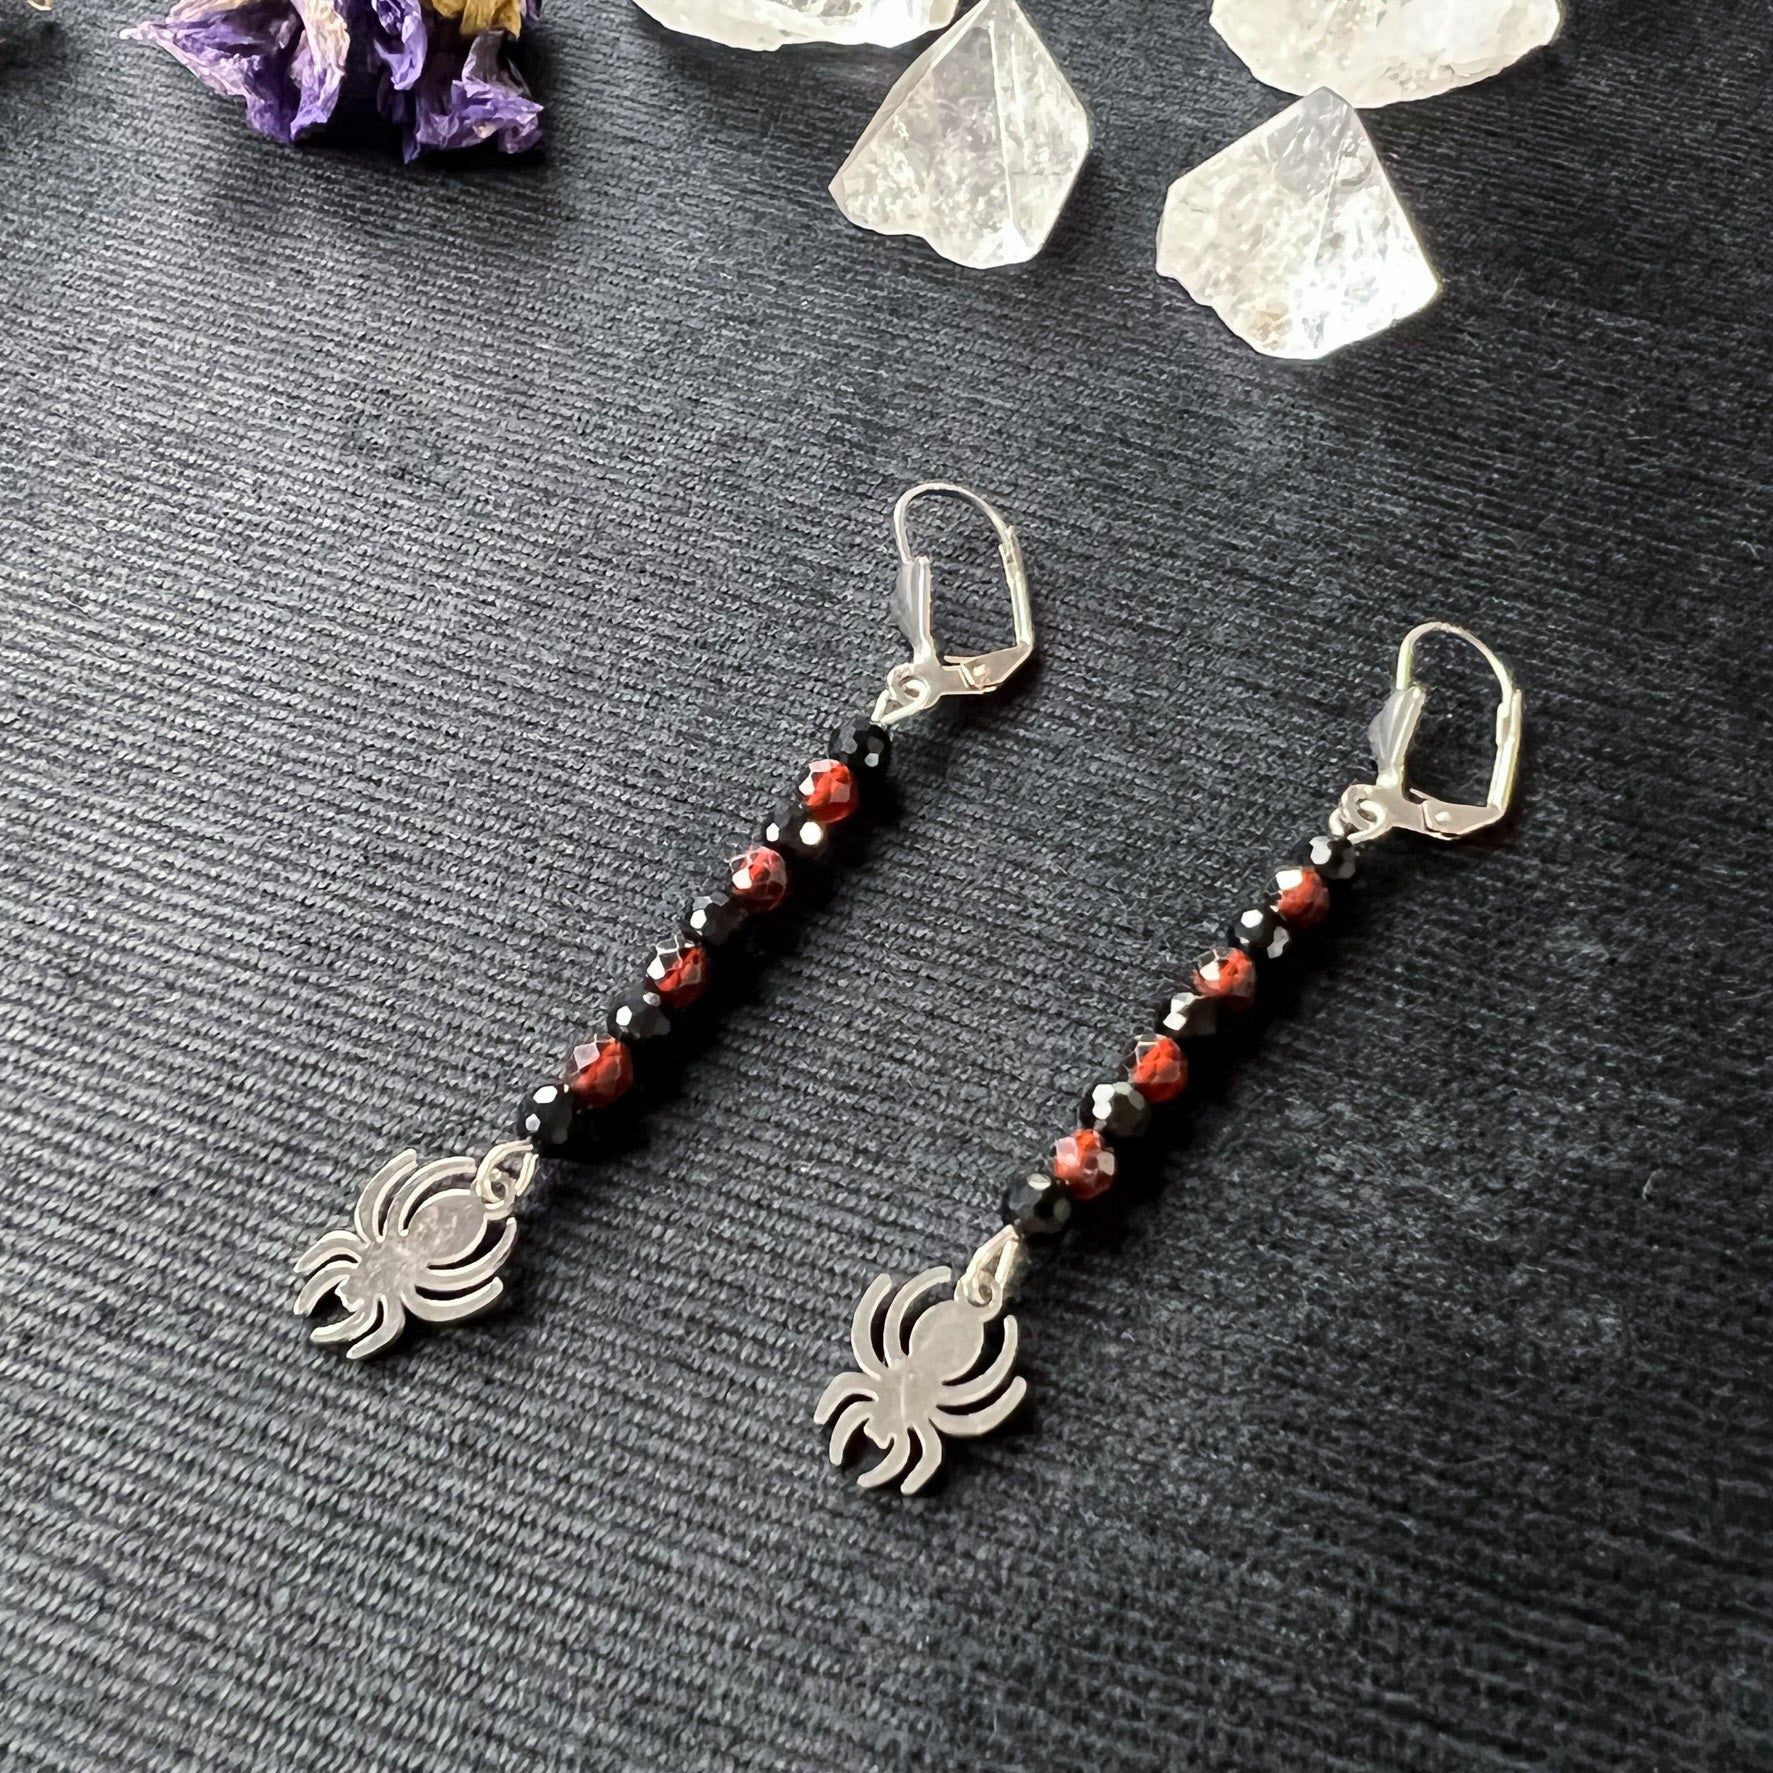 Gothic spider earrings made of garnet, onyx and stainless steel Baguette Magick